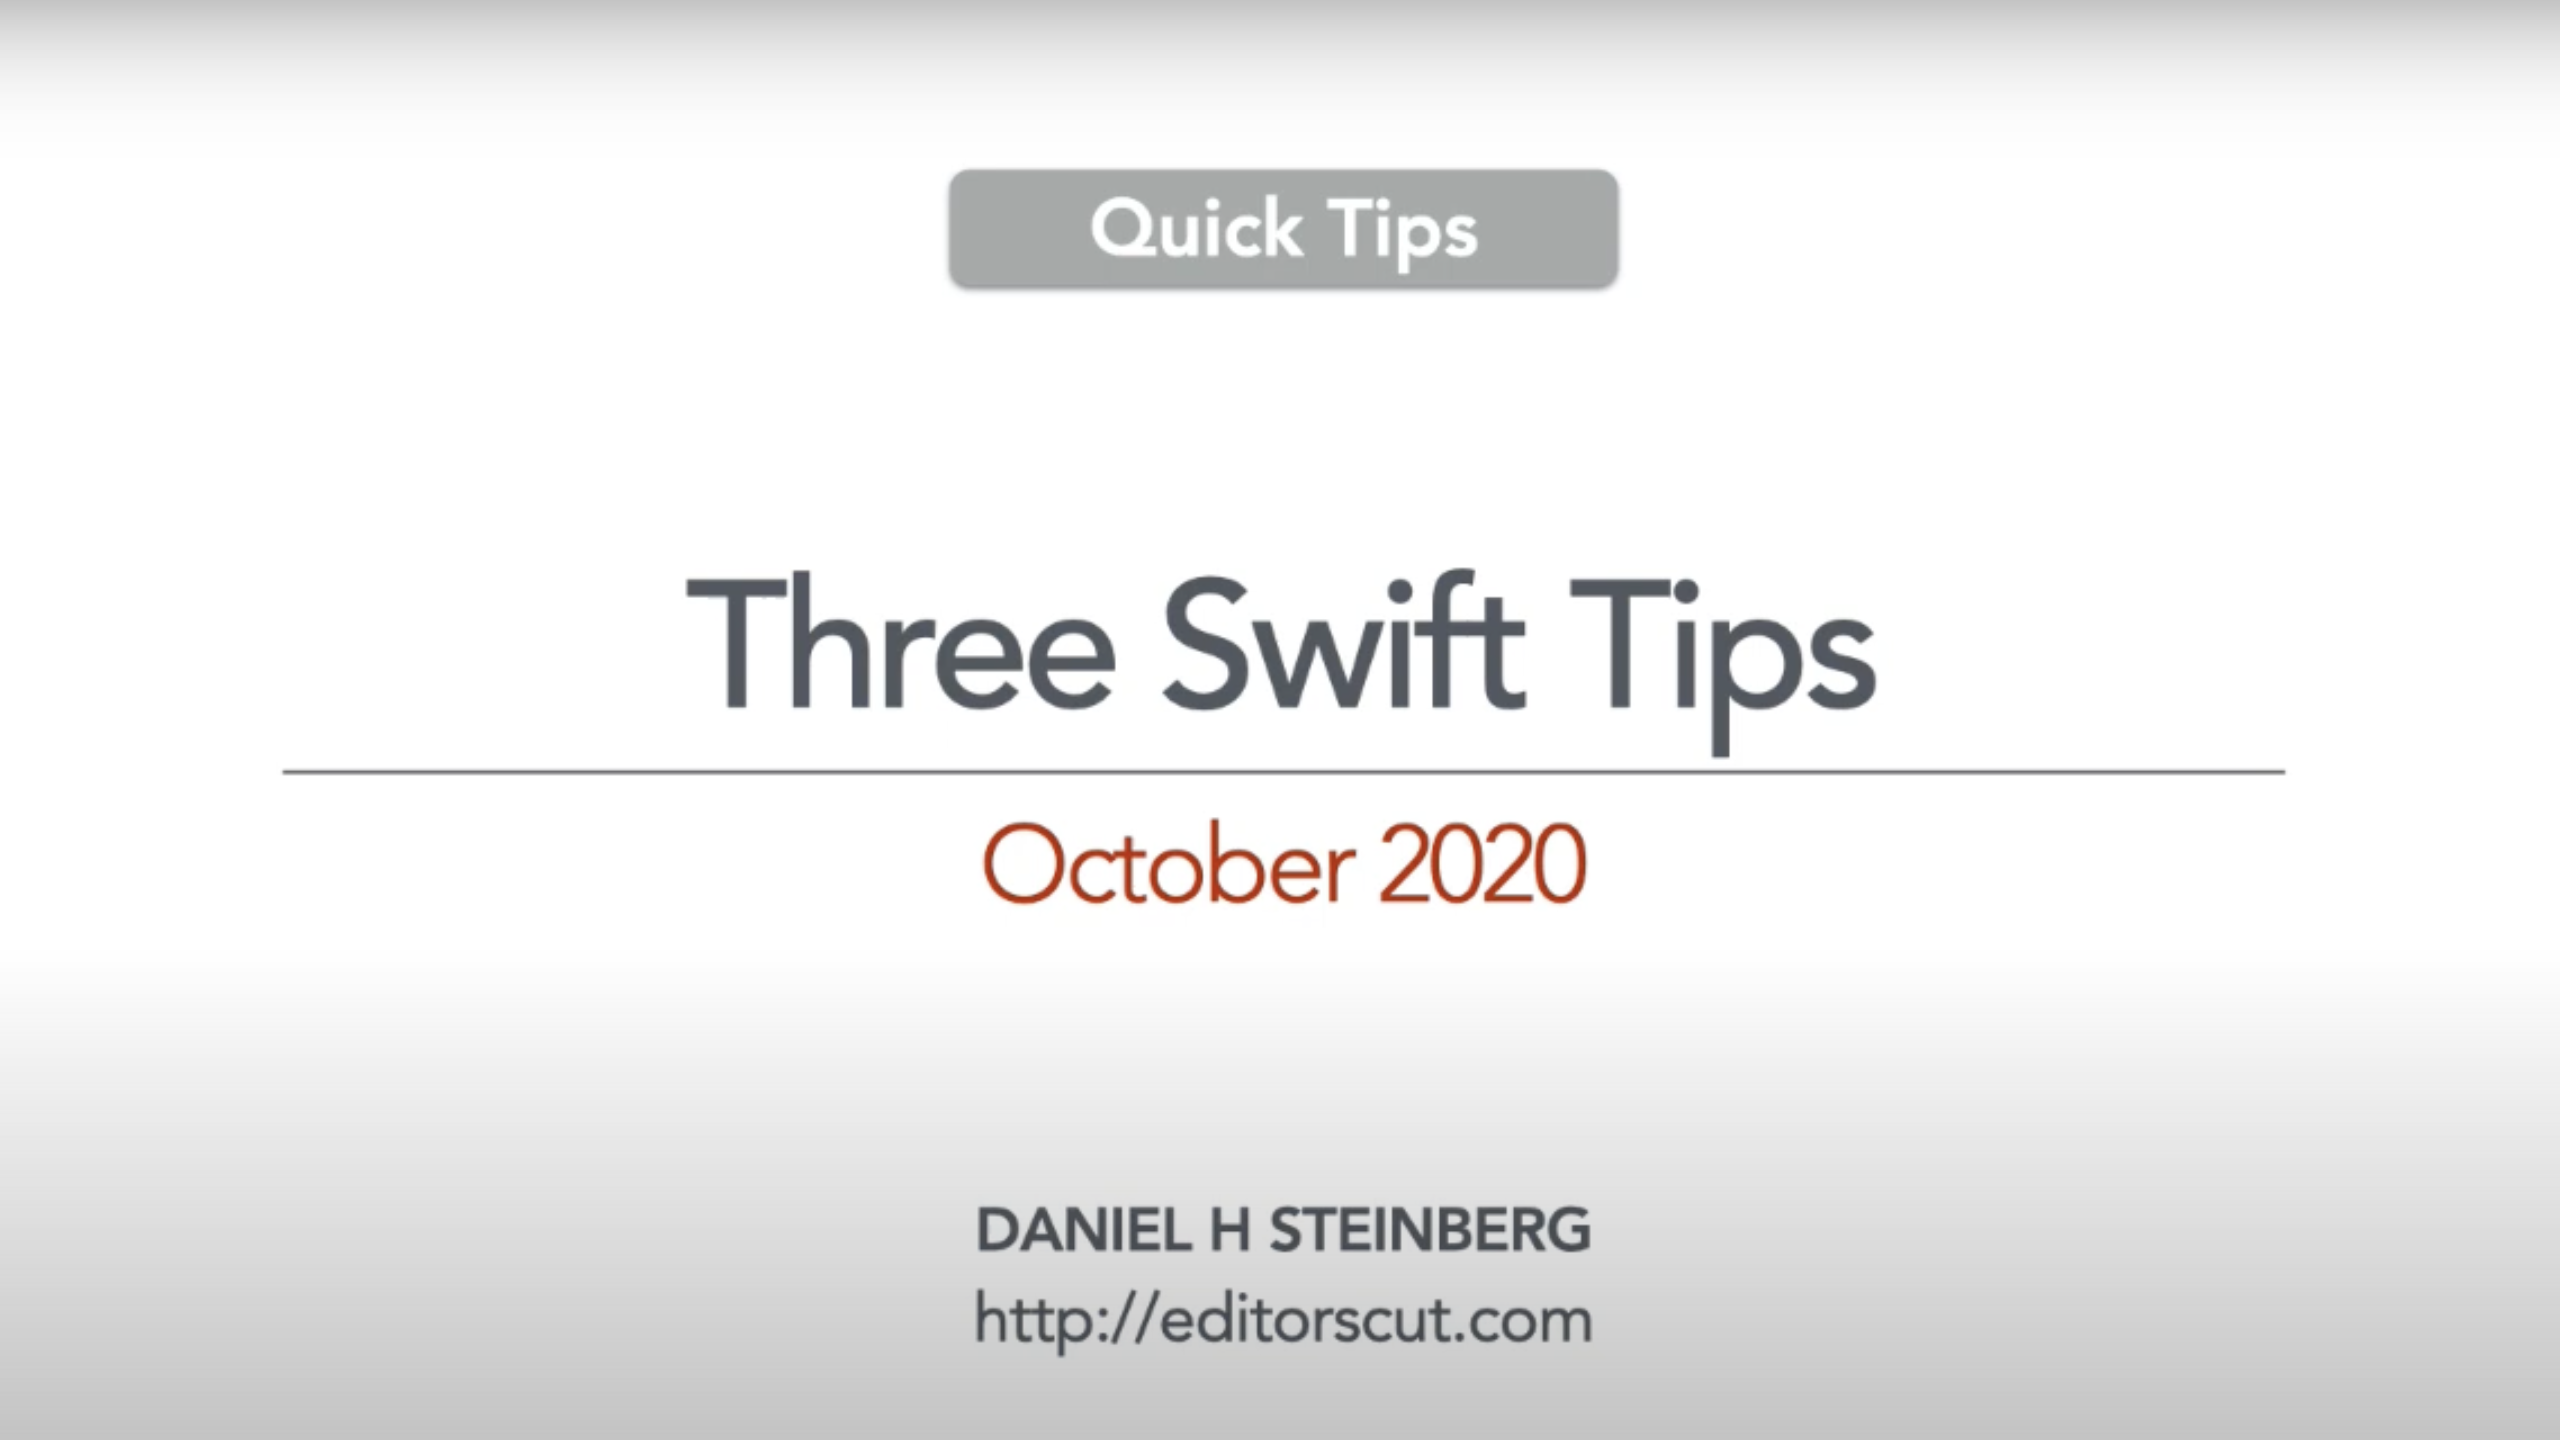 Link to three swift tips